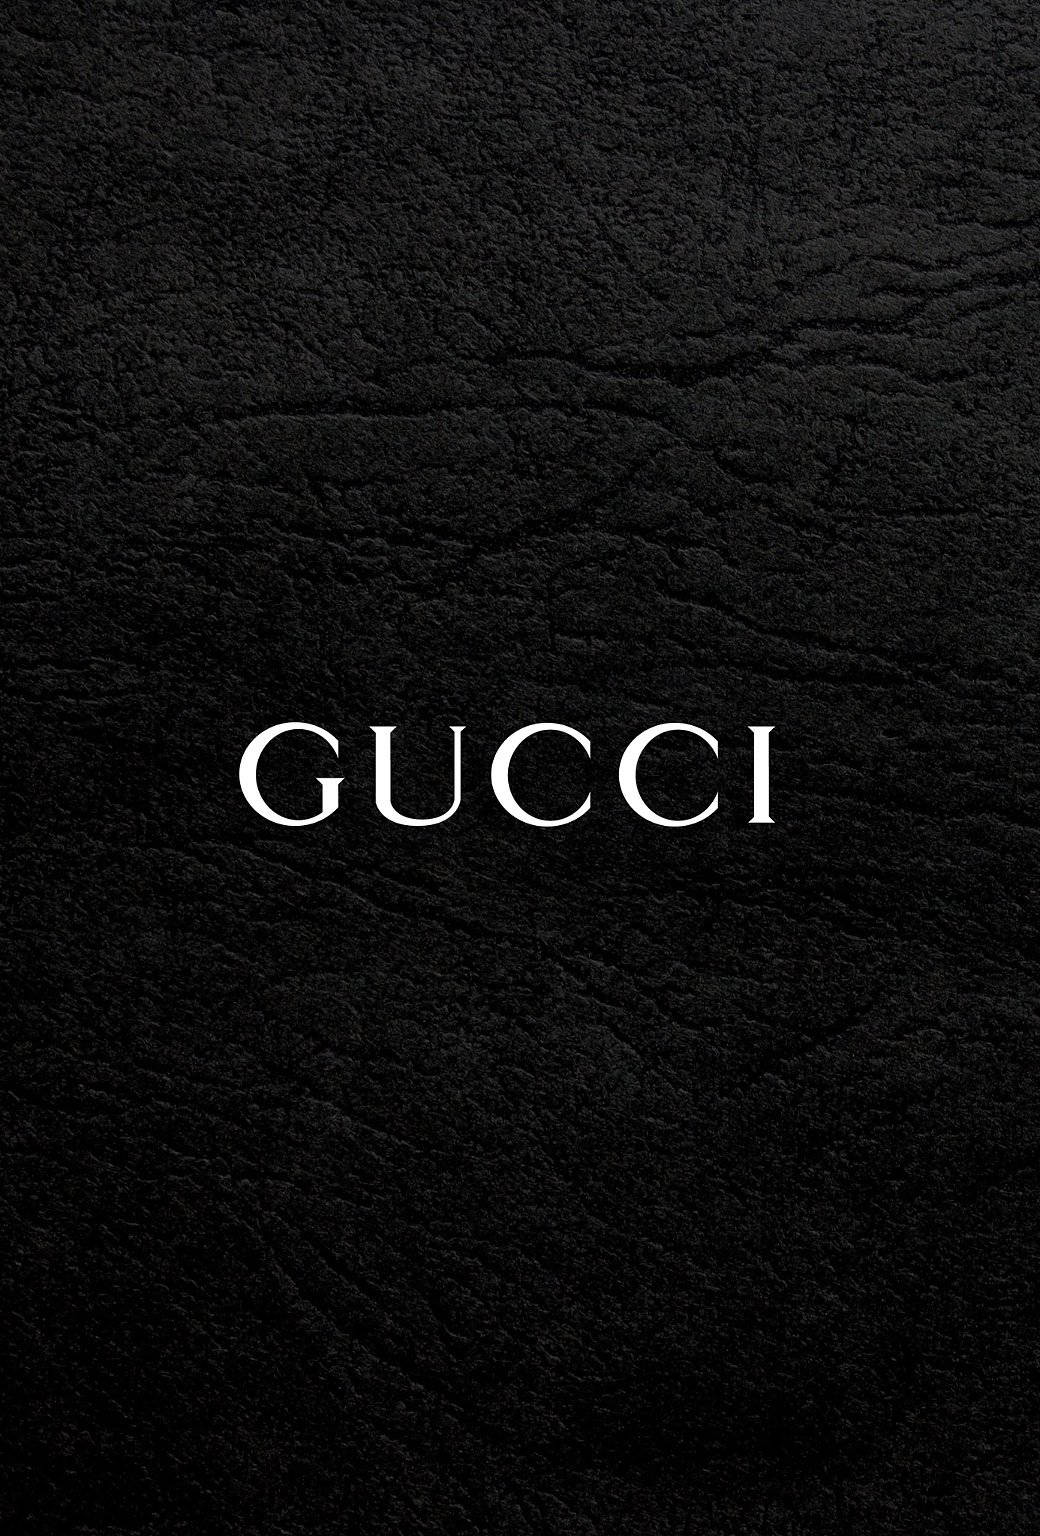 Gucci 1040X1536 Wallpaper and Background Image